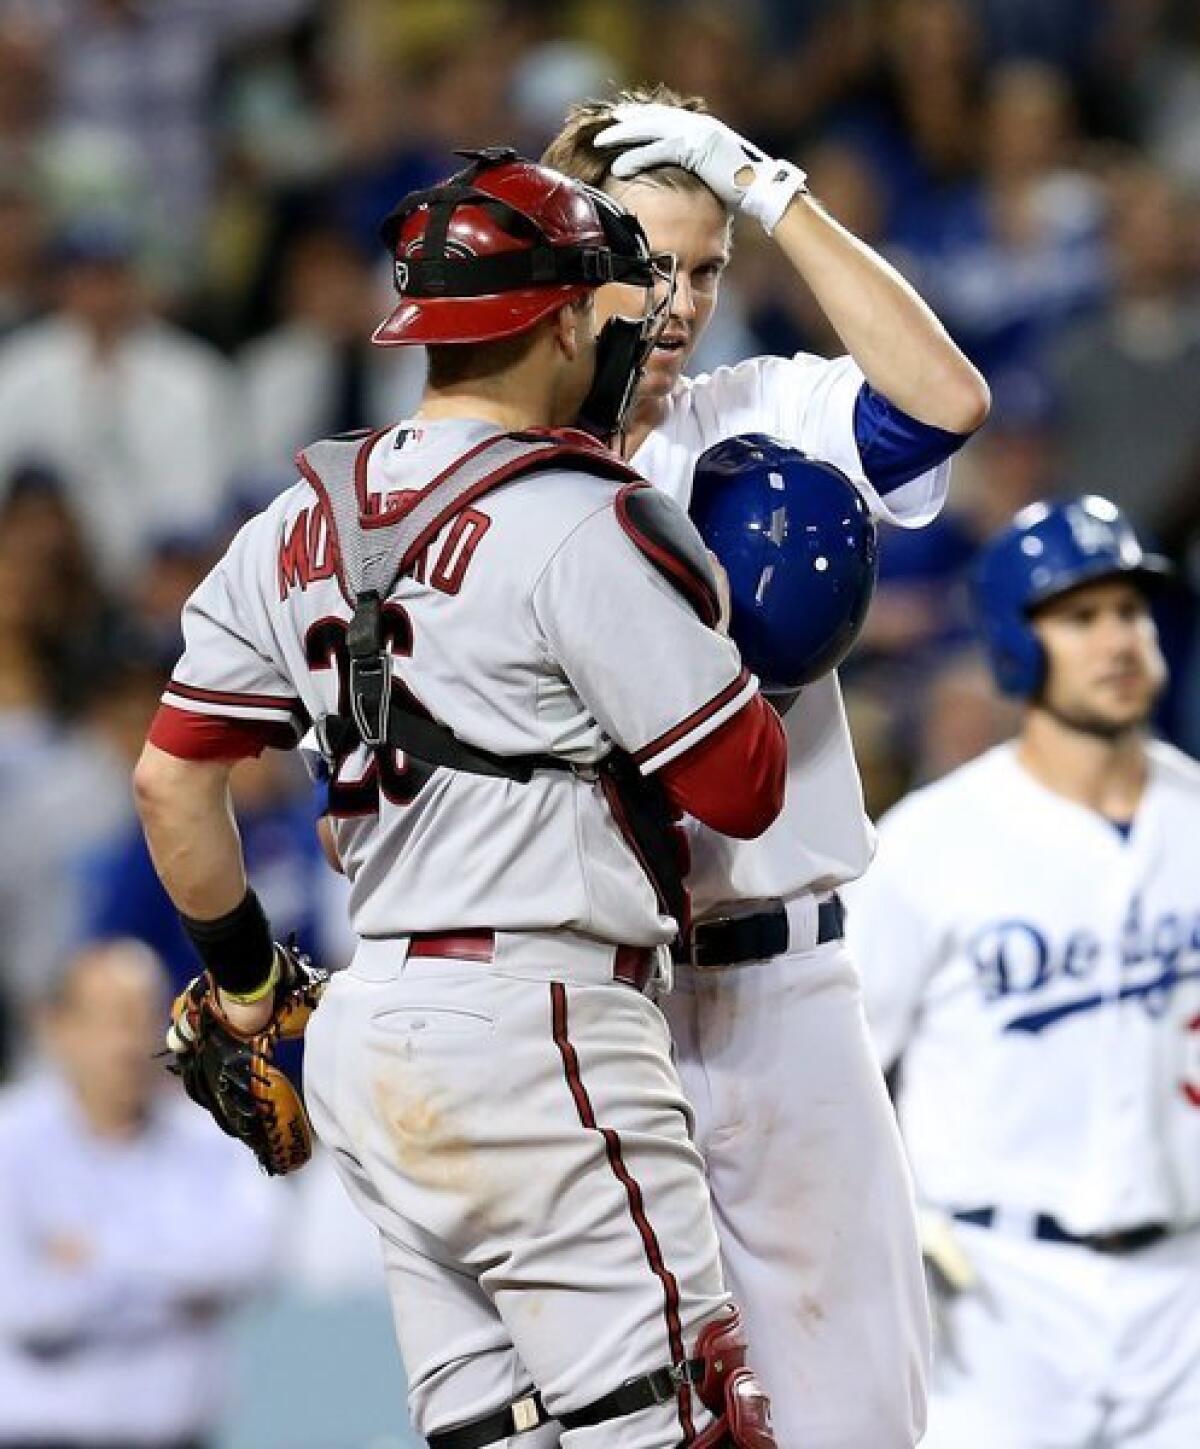 Zack Greinke and Miguel Montero talk at the plate after the Dodgers' starter was hit by an Ian Kennedy pitch in the seventh inning of the Dodgers' 5-3 victory over the Diamondbacks.